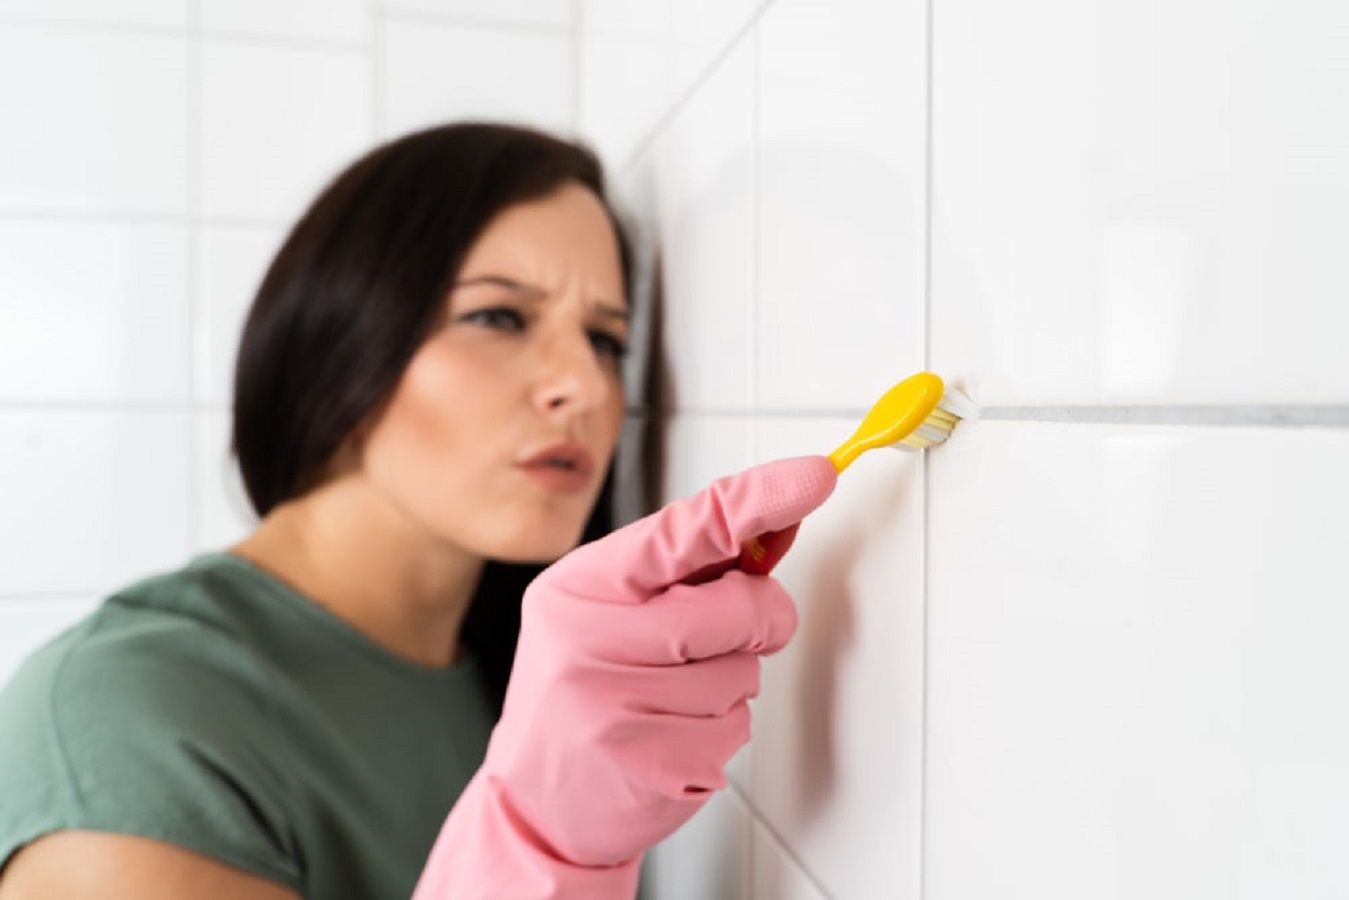 How to Clean Grout - Find 6 Effective Homemade Grout Cleaners